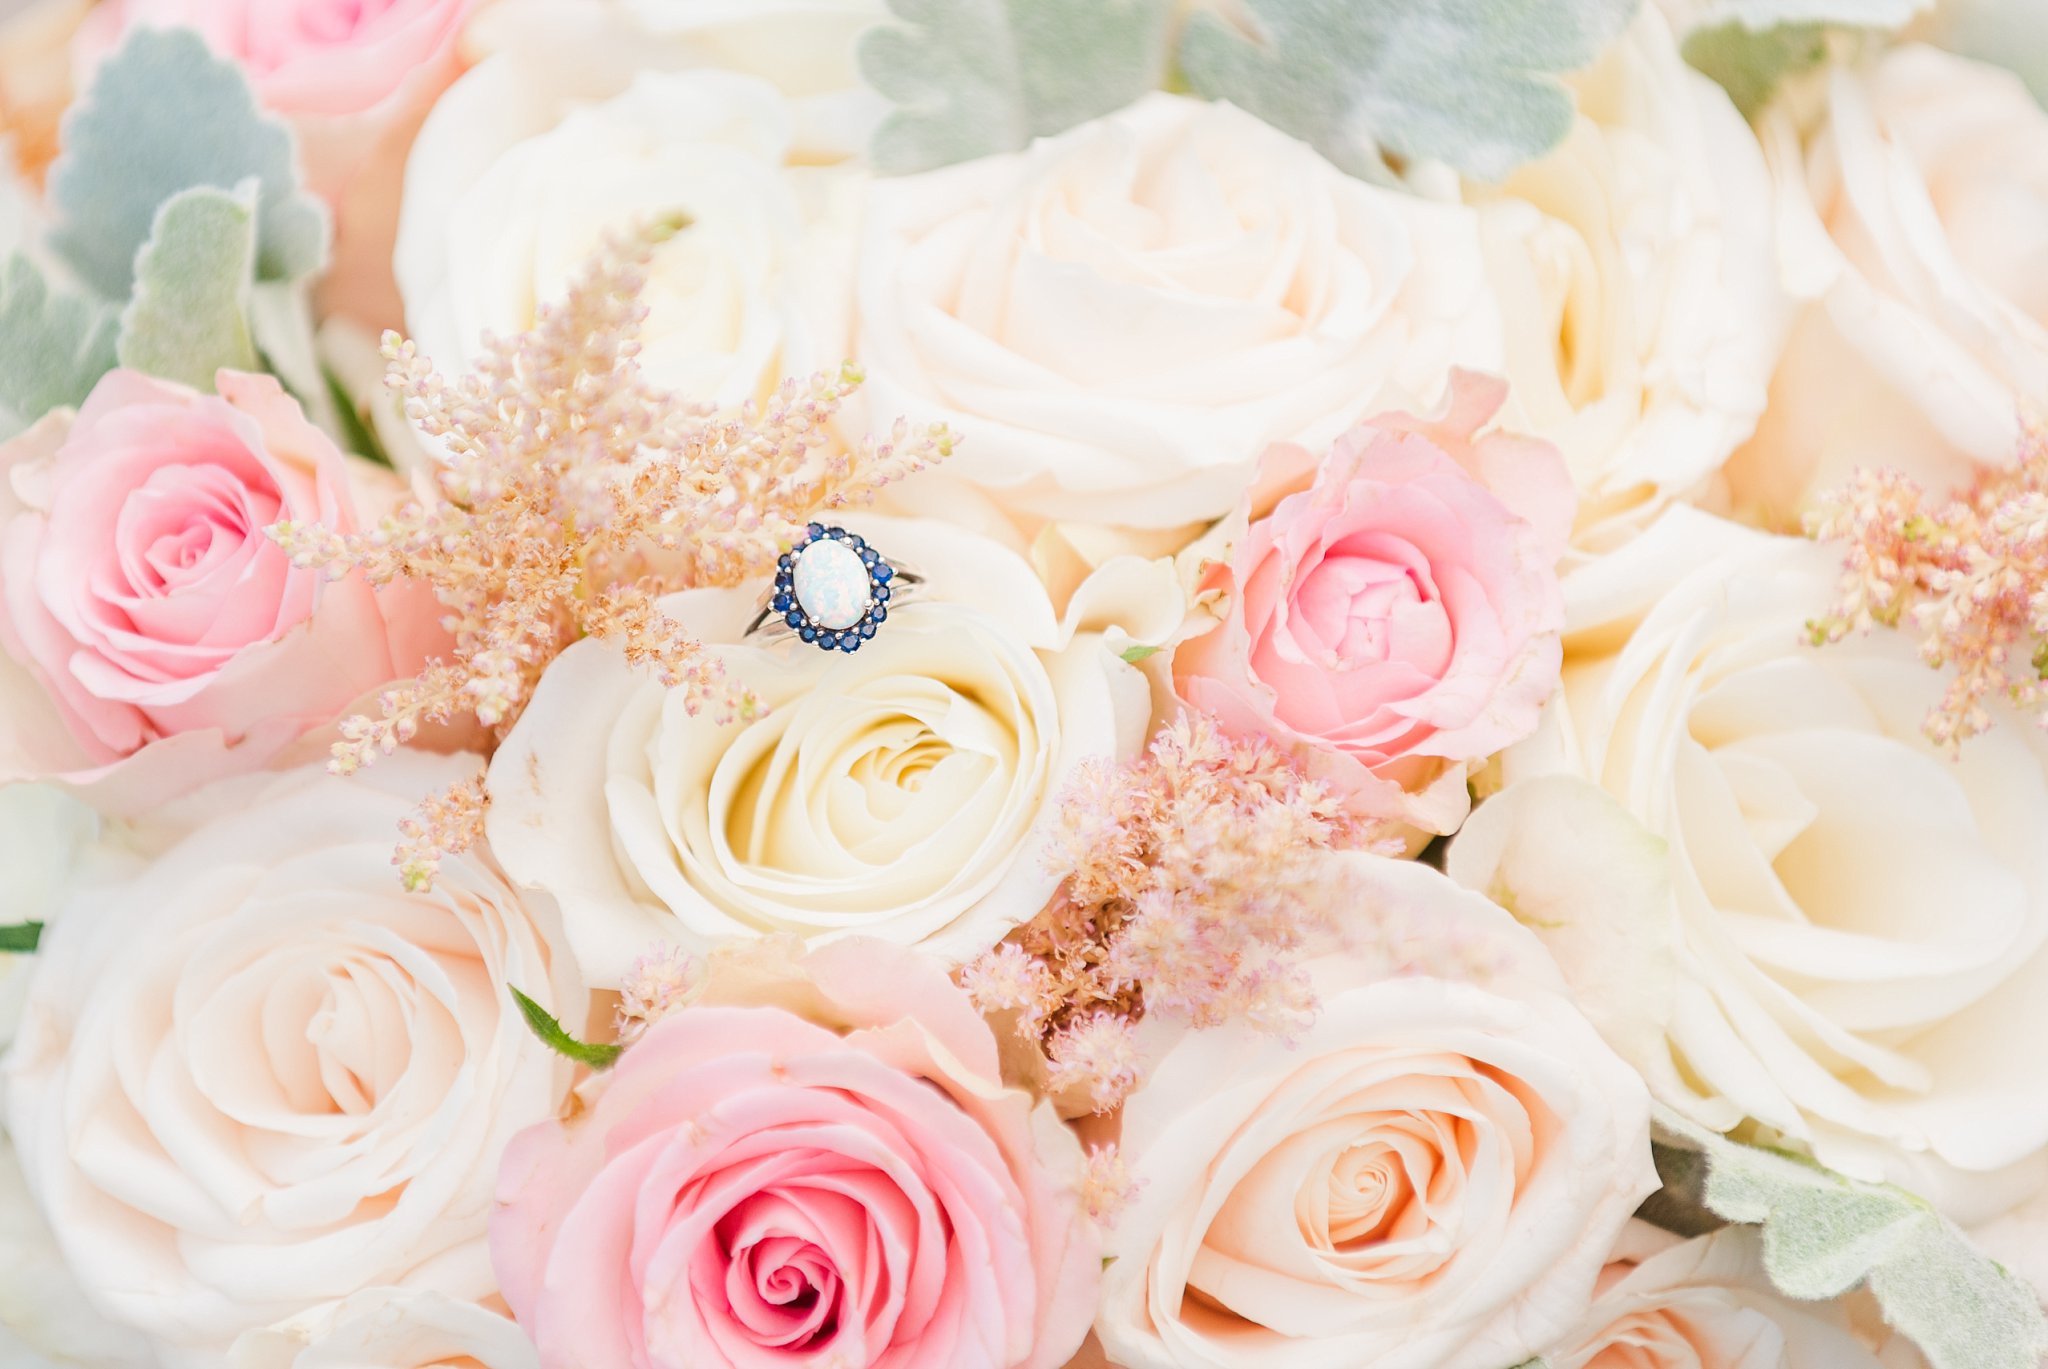 an engagement ring on a bouquet of white and pink roses